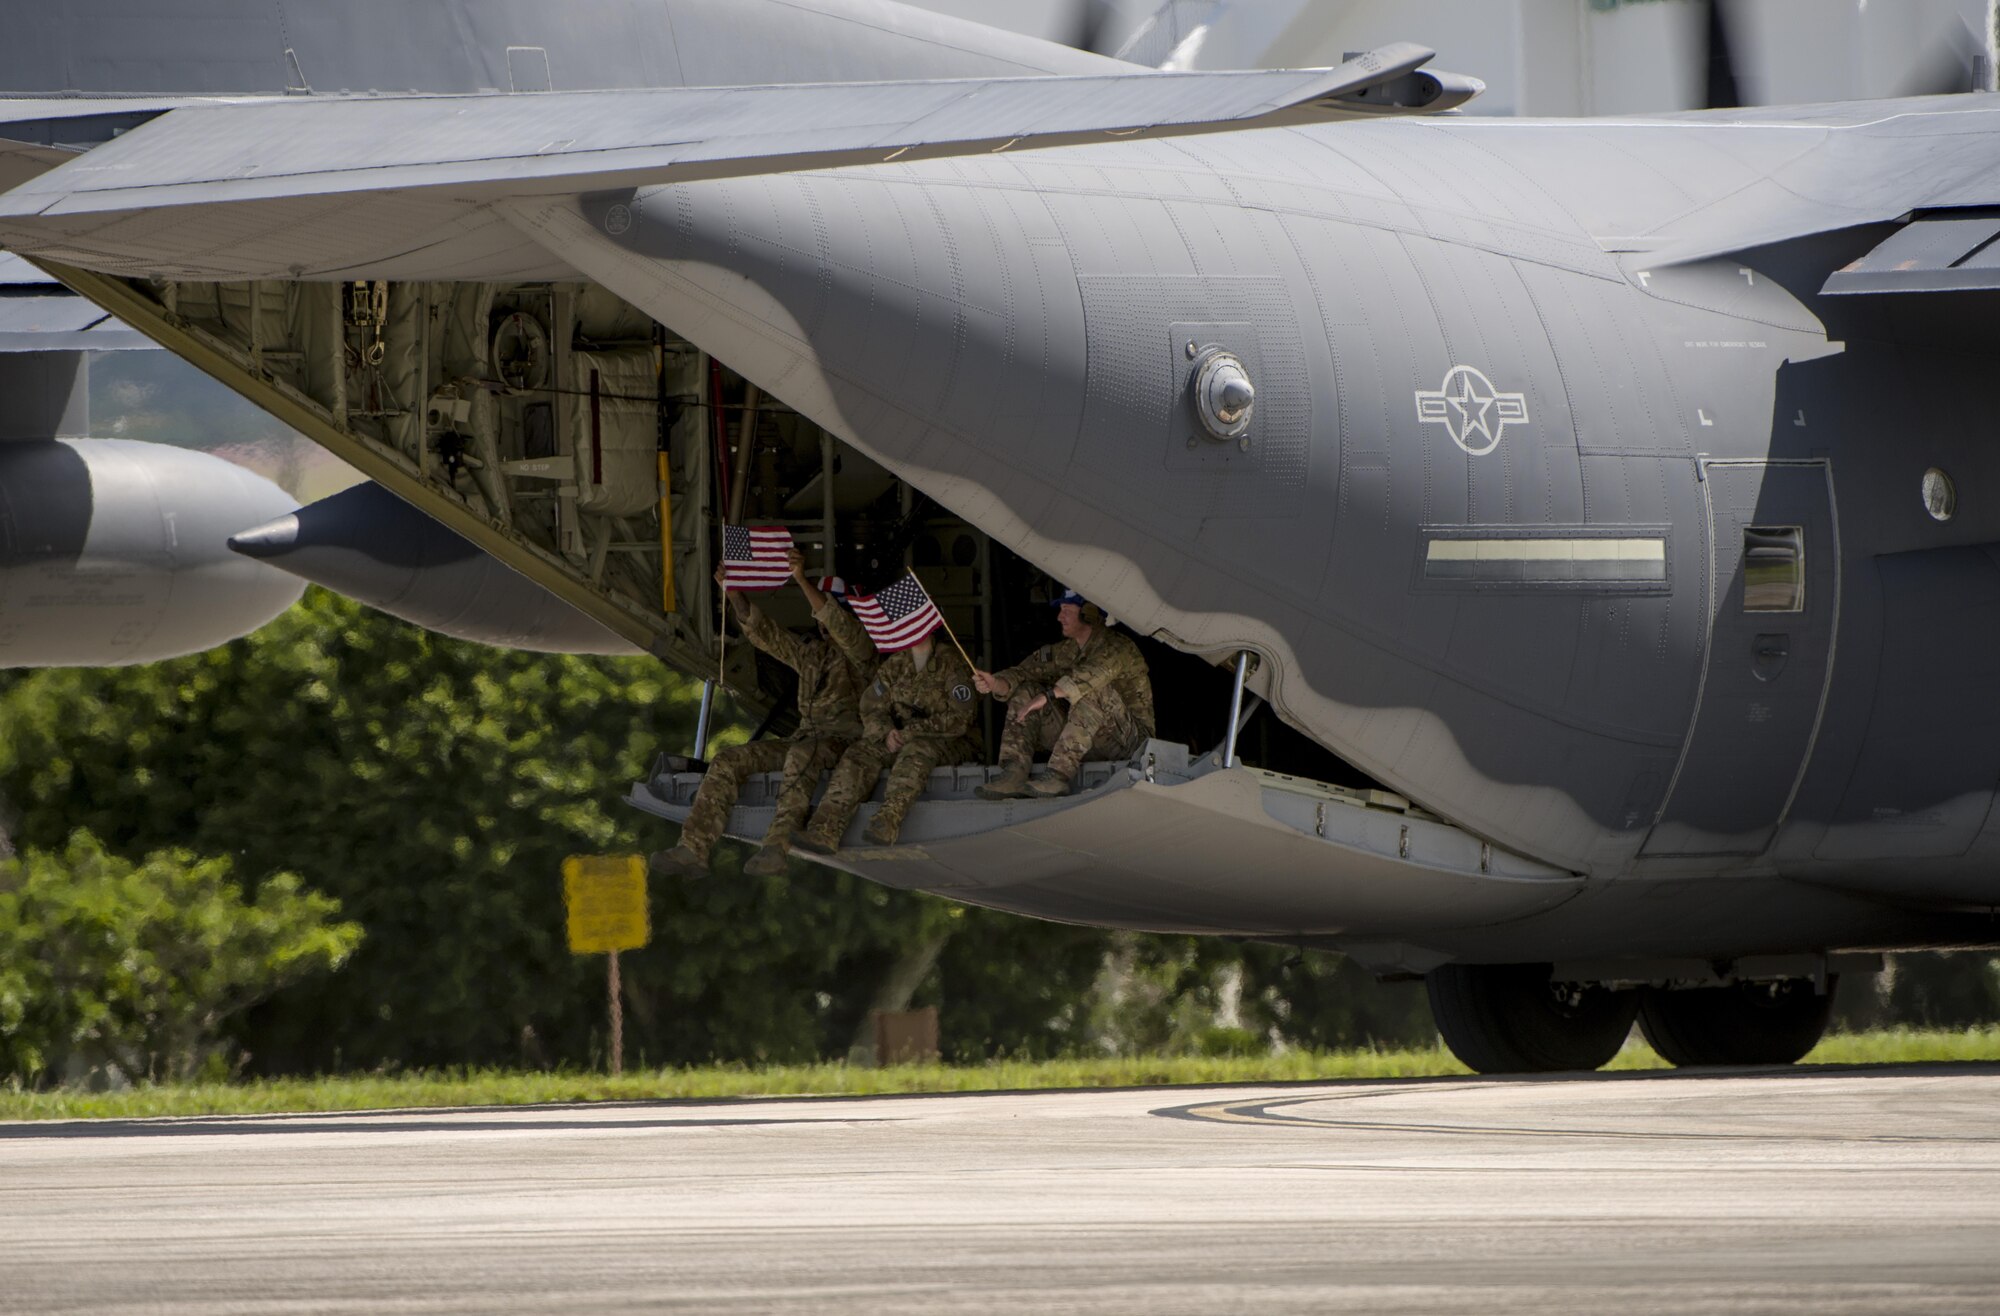 U.S. Air Force MC-130J Commando II aircrew from the 17th Special Operations Squadron wave to onlookers before leaving for a mass launch training mission June 22, 2017 at Kadena Air Base, Japan. Airmen from the 17th SOS conduct training operations often to ensure constant readiness to perform a variety of high-priority, low-visibility missions throughout the Indo-Asia Pacific Region. (U.S. Air Force photo by Senior Airman Omari Bernard)